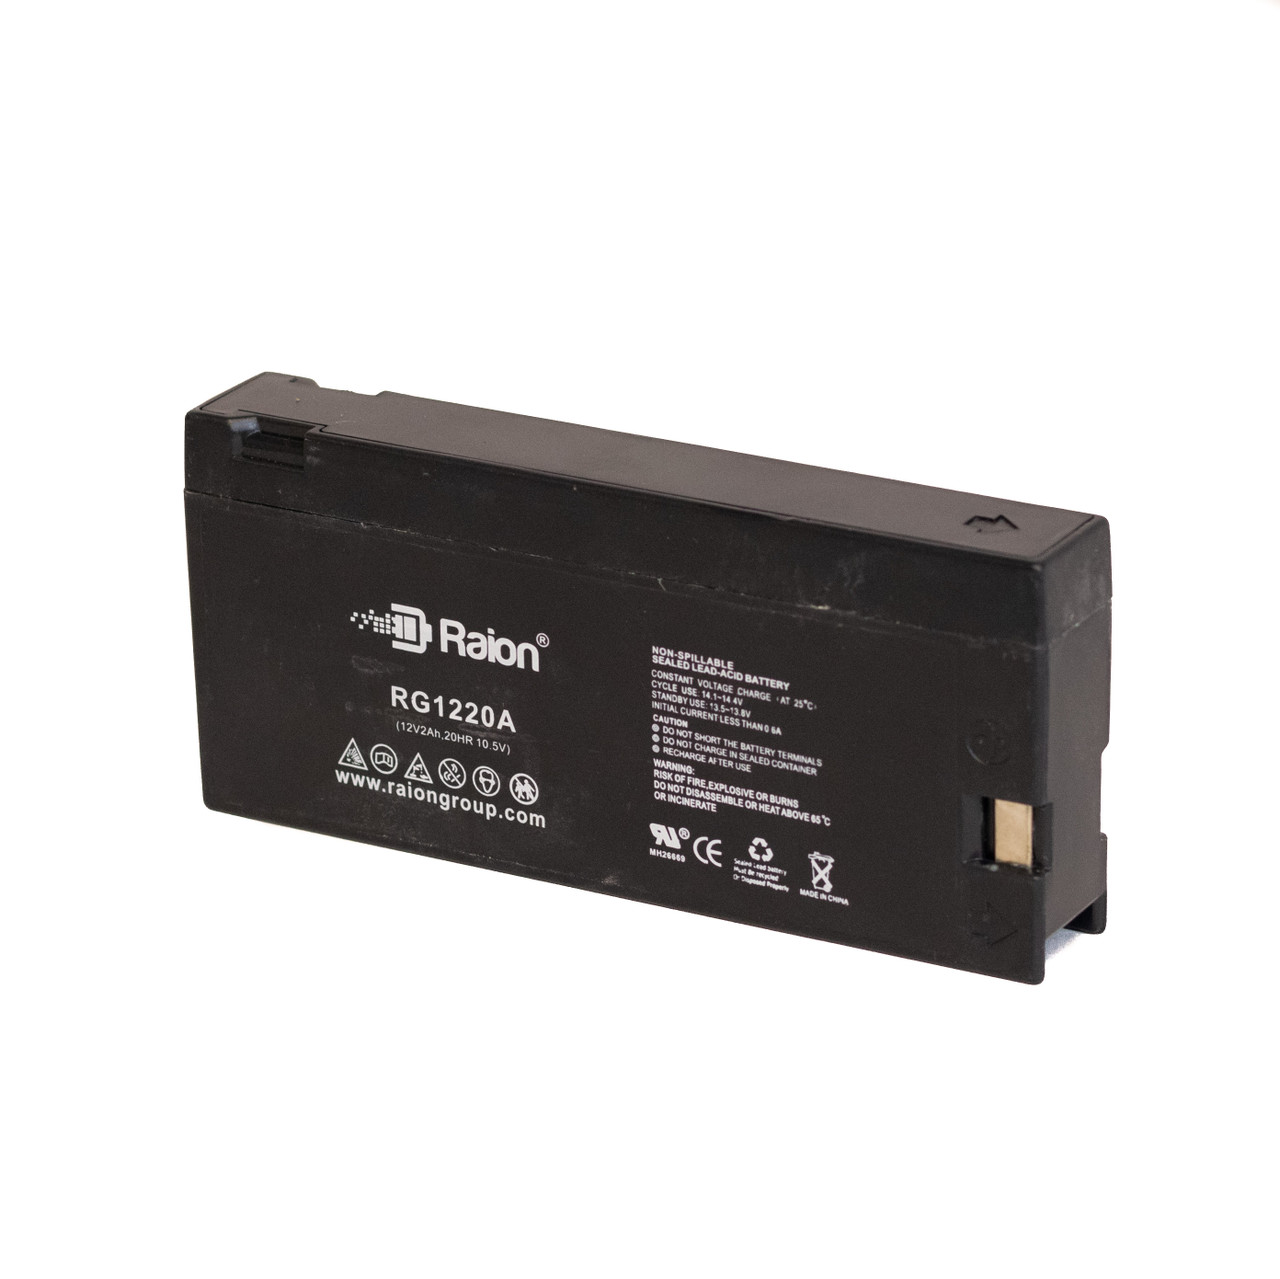 Raion Power RG1220A Replacement Battery for General Electric 1CVA156